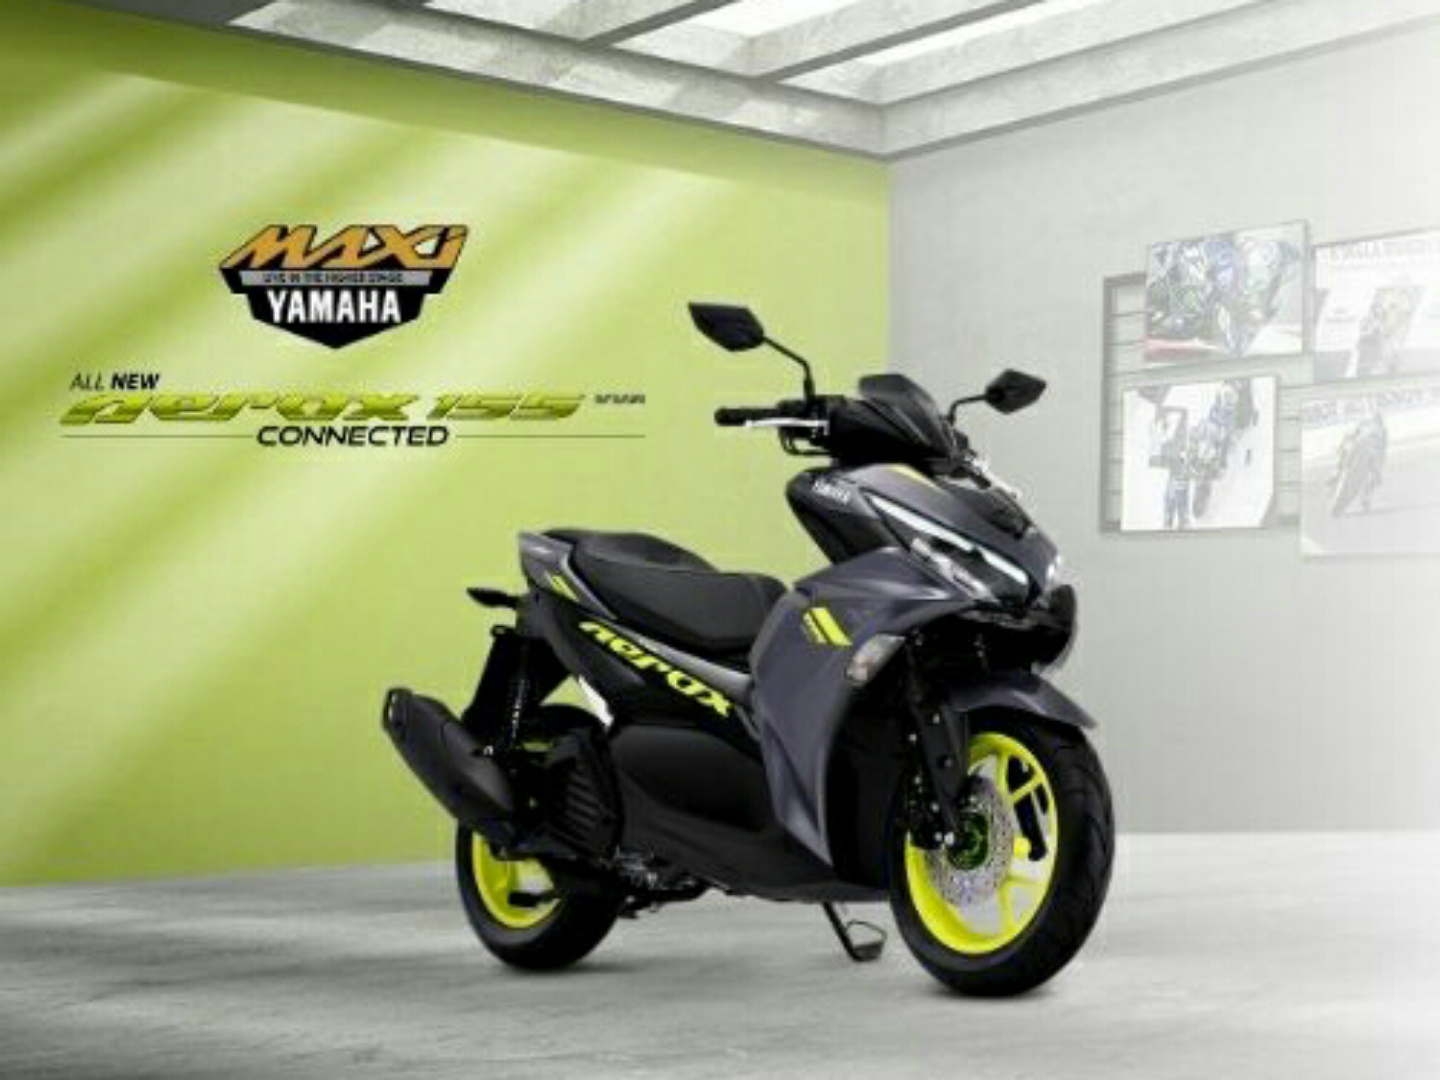 YAMAHA ALL NEW AEROX 155 CONNECTED, SCOOTER SPORT TERBAIK